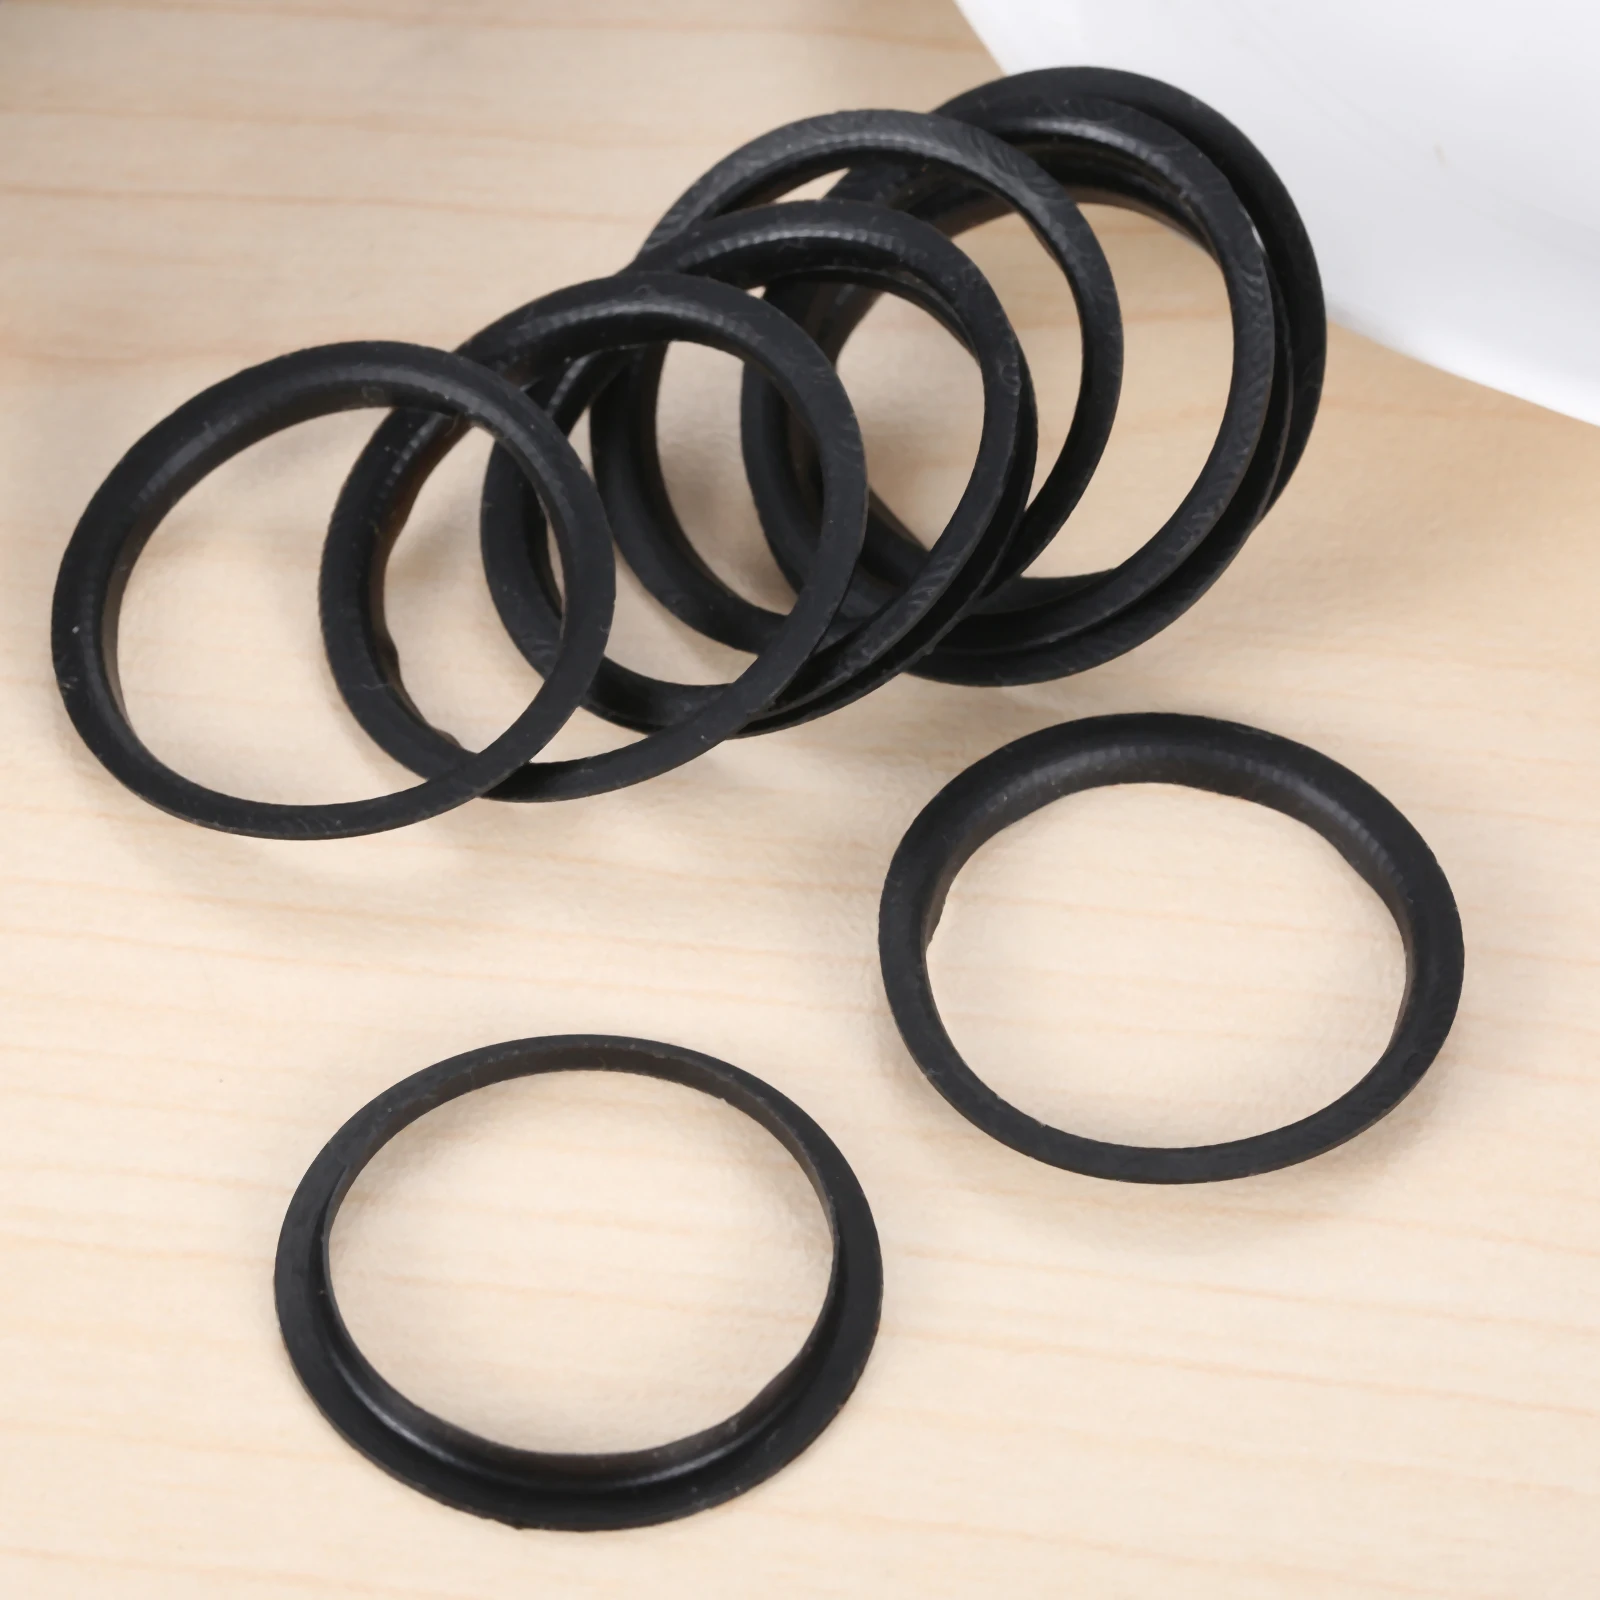 

10Pcs Black Food Grade Soft Silicone O-rings Rubber Gaskets for Nespresso Stainless Steel Coffee Refillable Capsules Body Cup